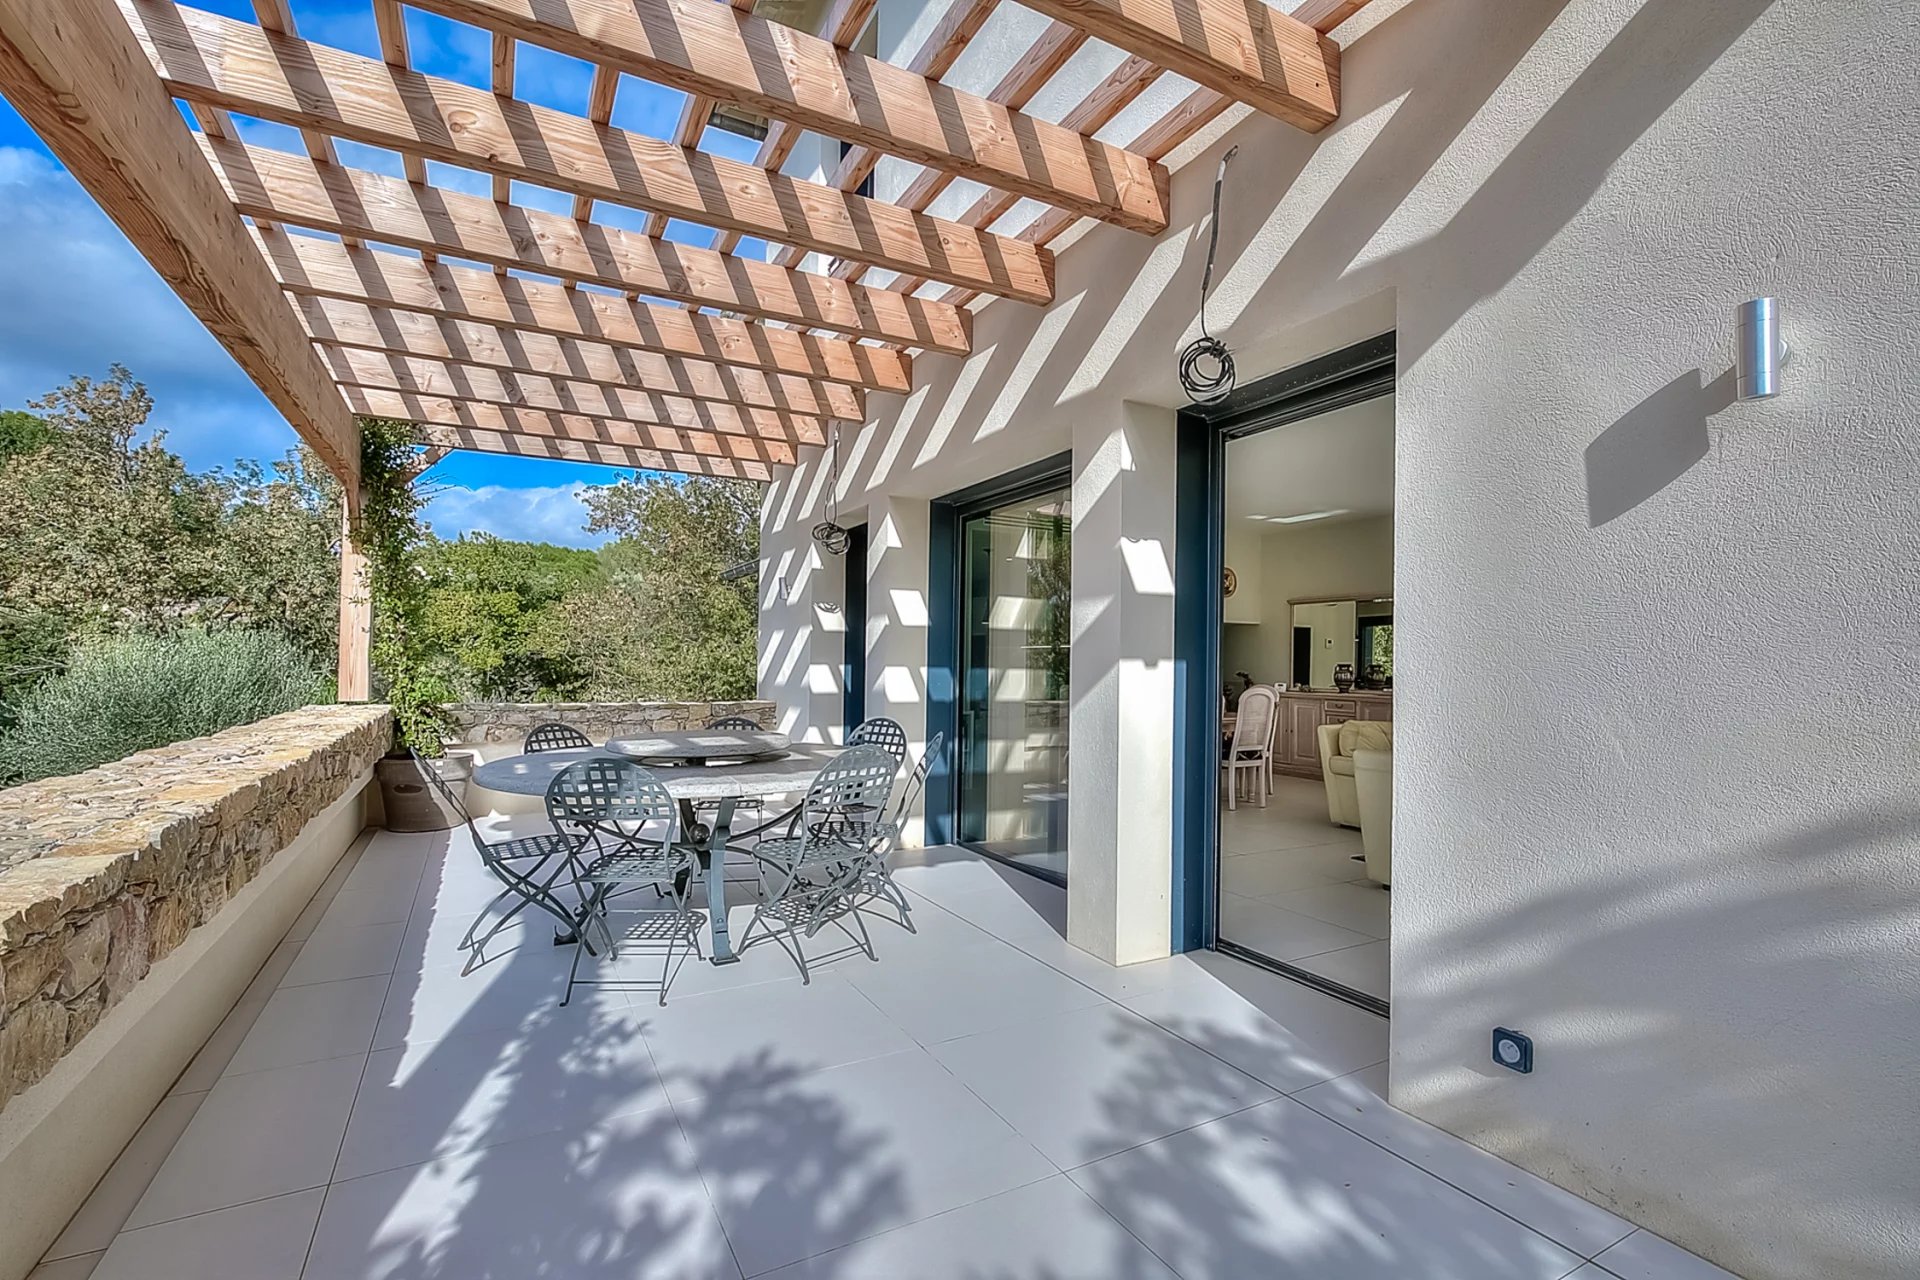 Luxury villa with panoramic view of the Village of MOUGINS